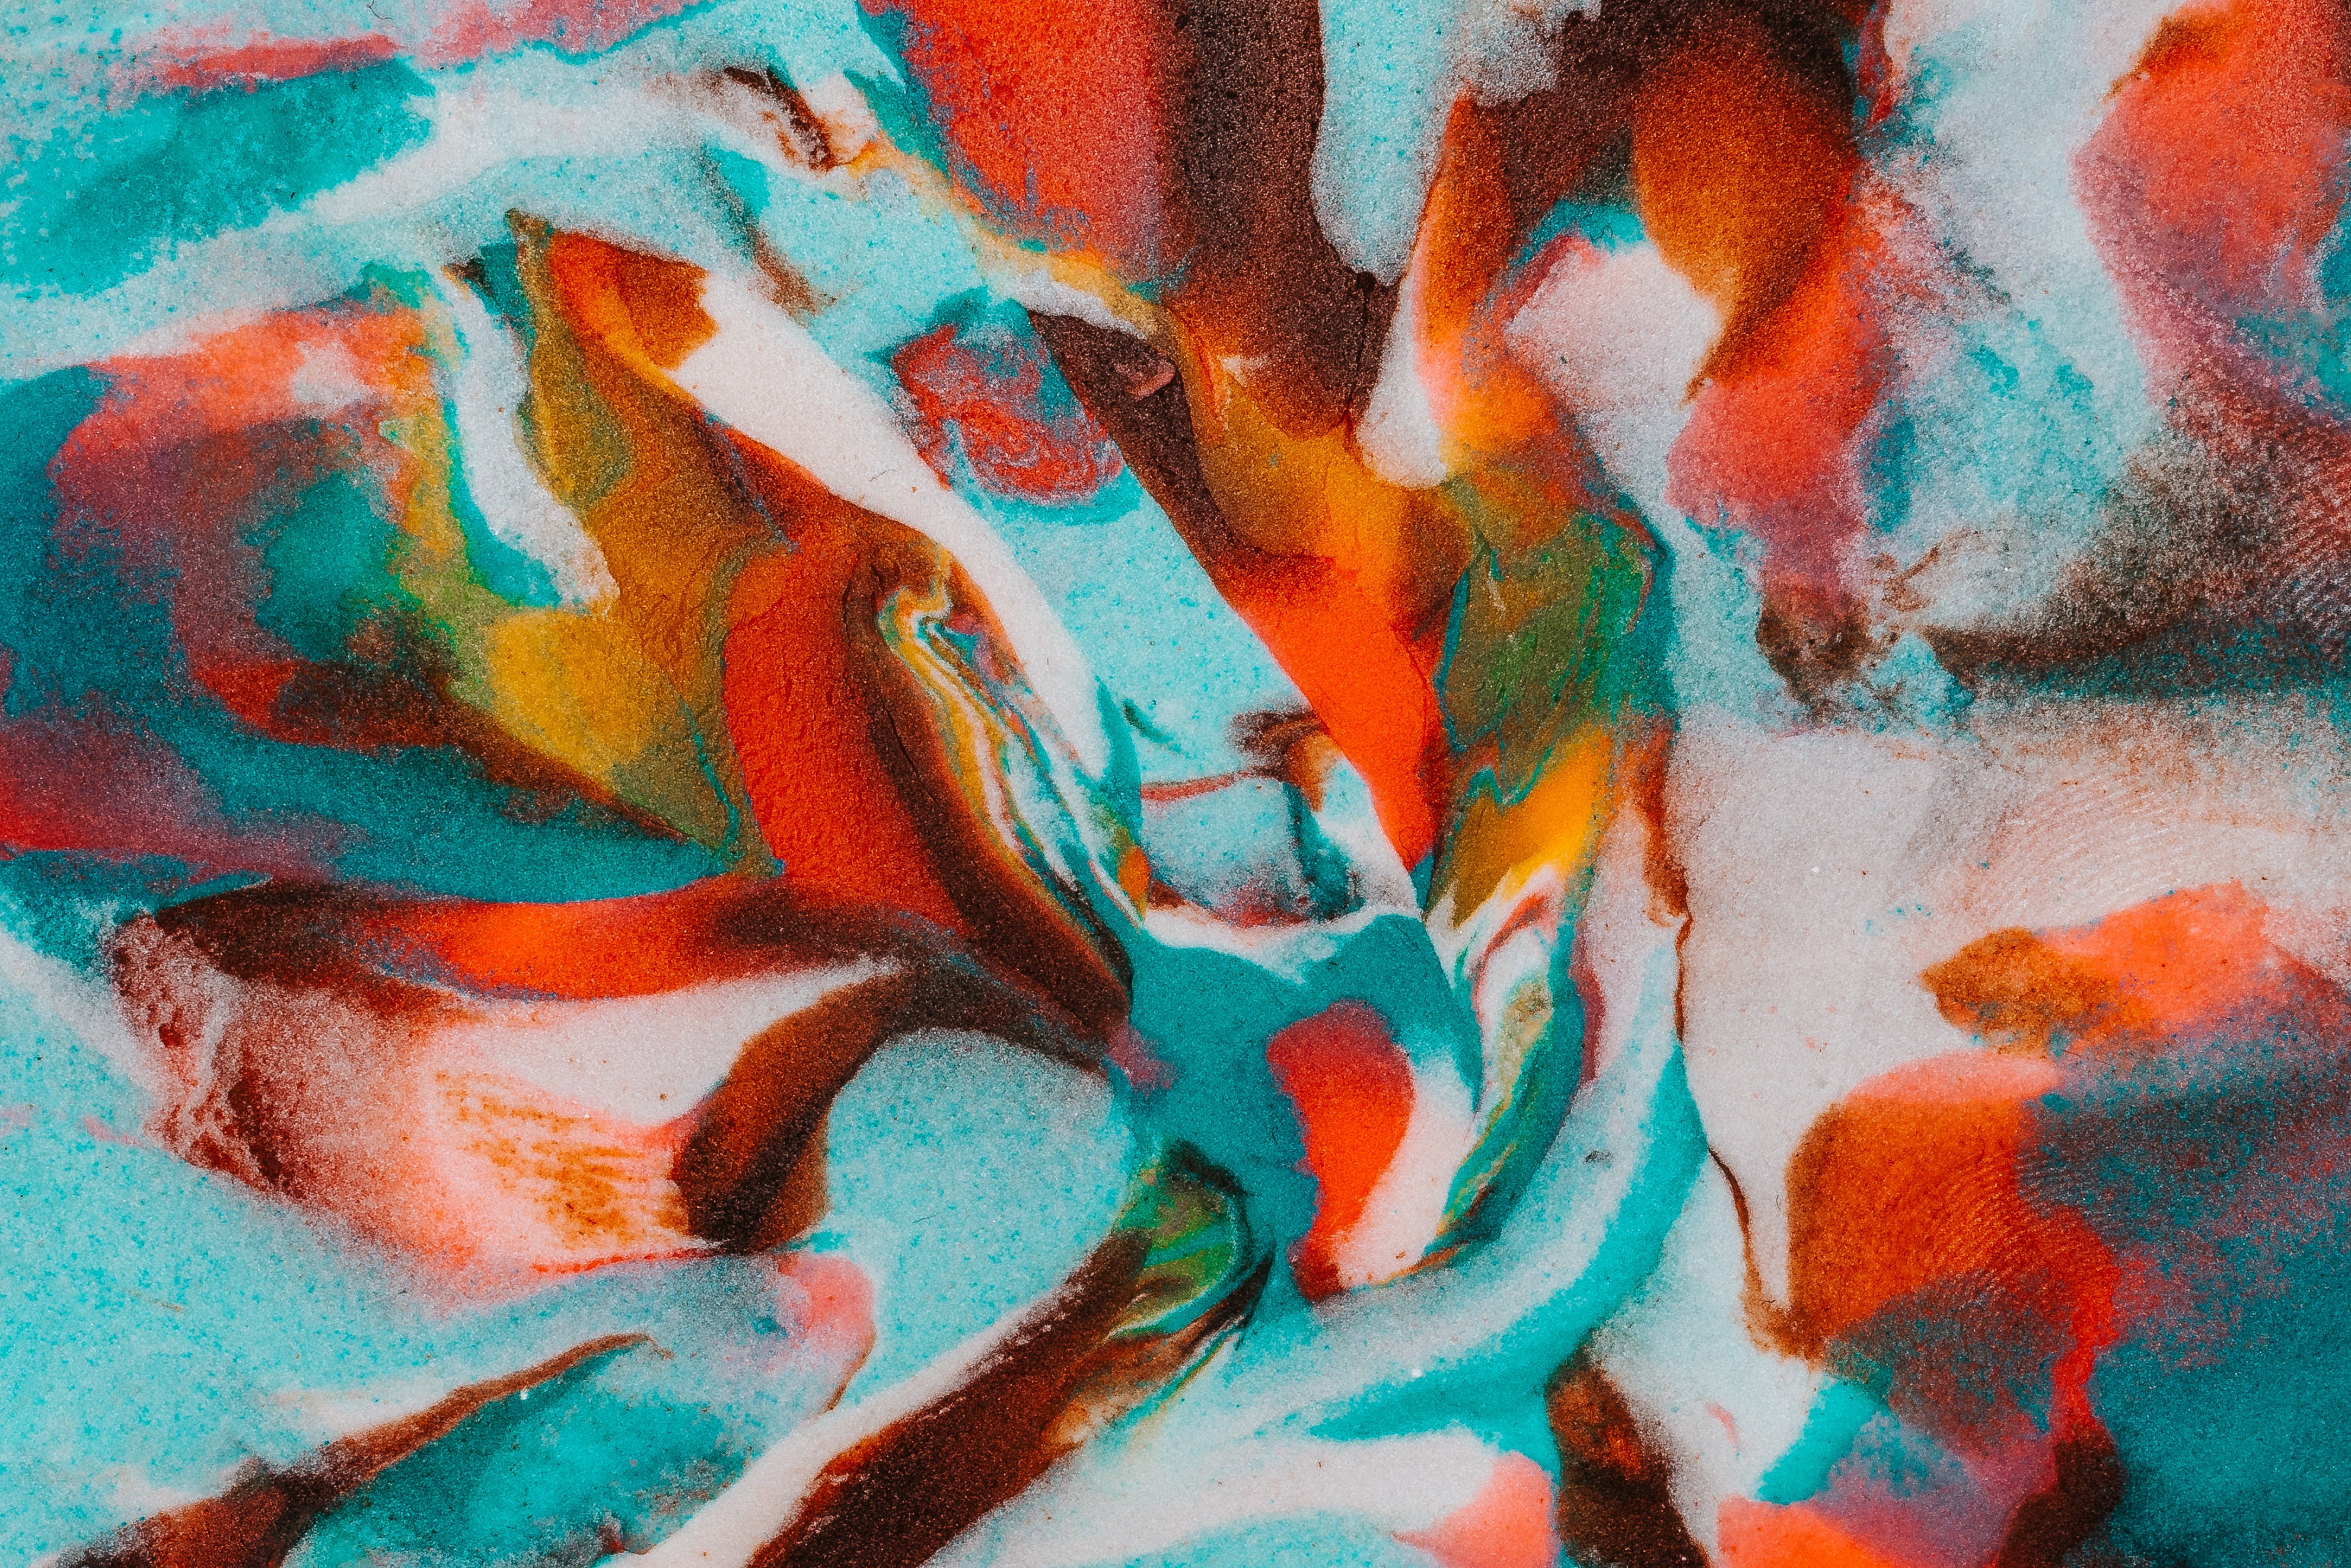 motley, abstract, multicolored, paint, colors, color, stains, spots Image for desktop